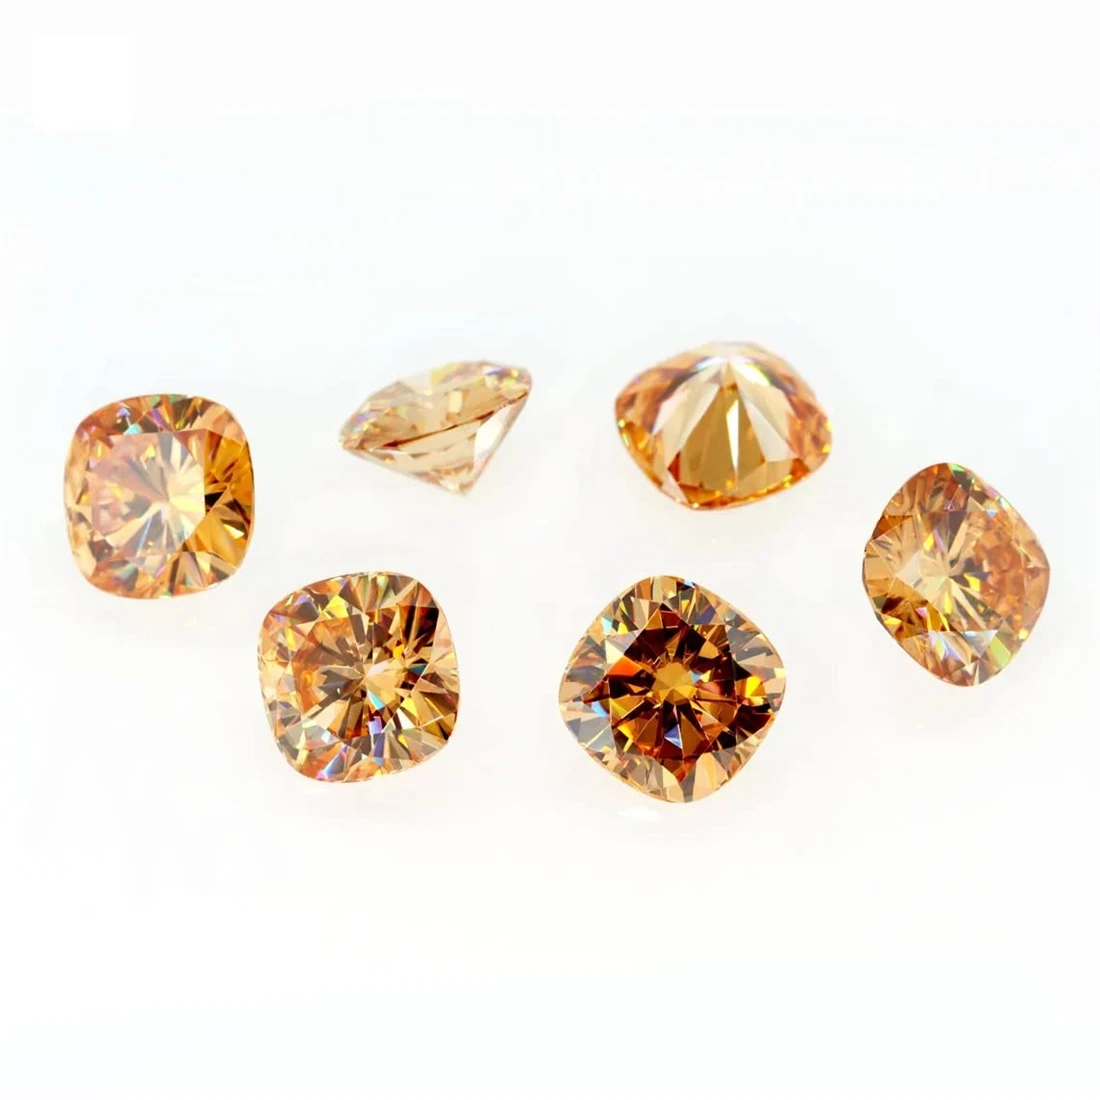 Cushion Cut Champagne Gold Loose Color Moissanite Diamond Gemstone for Making Wholesale Stones for Costume Jewelry Accessories